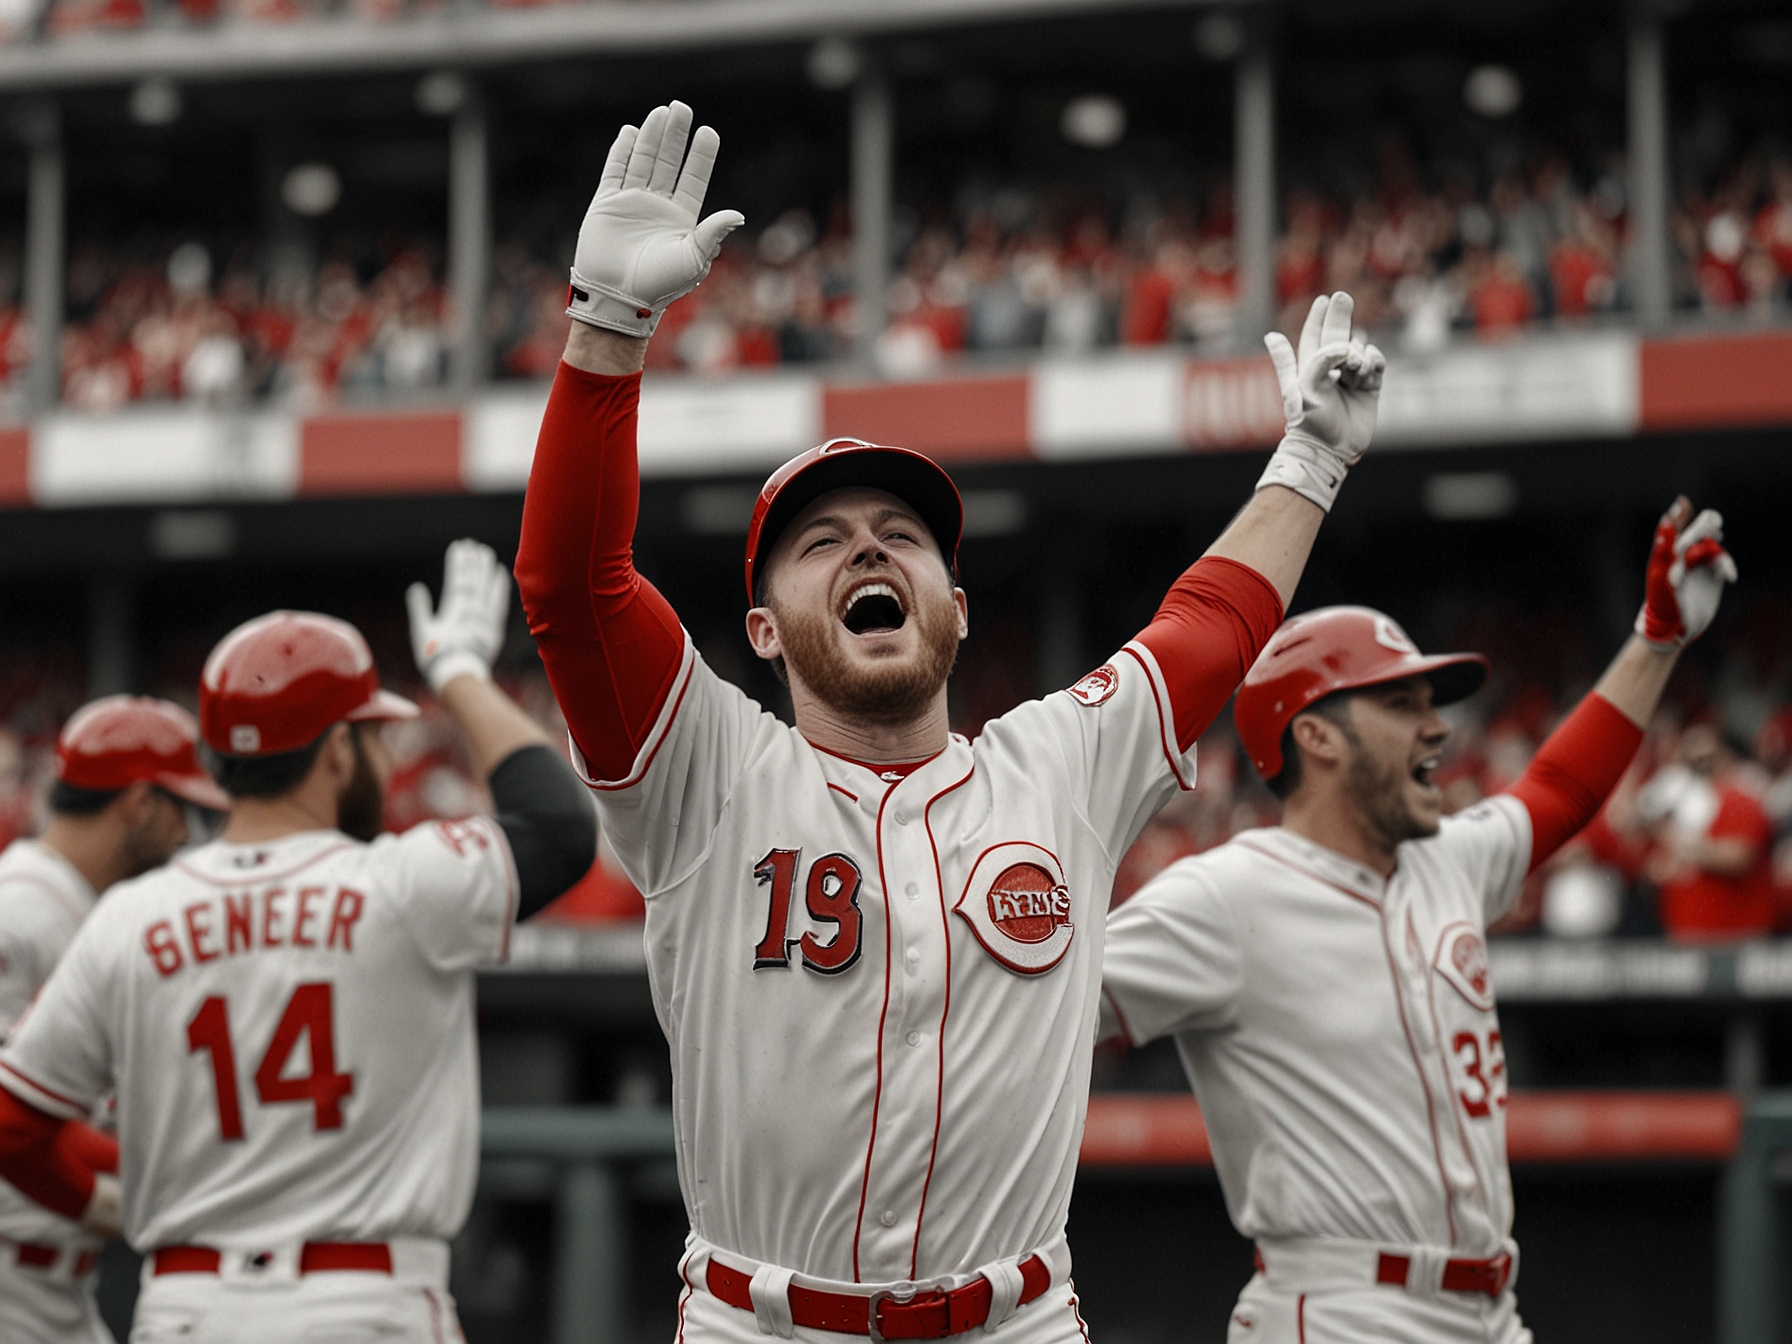 Spencer Steer celebrates after hitting a powerful home run, boosting the Cincinnati Reds' morale and contributing significantly to their dominant win against the St. Louis Cardinals.